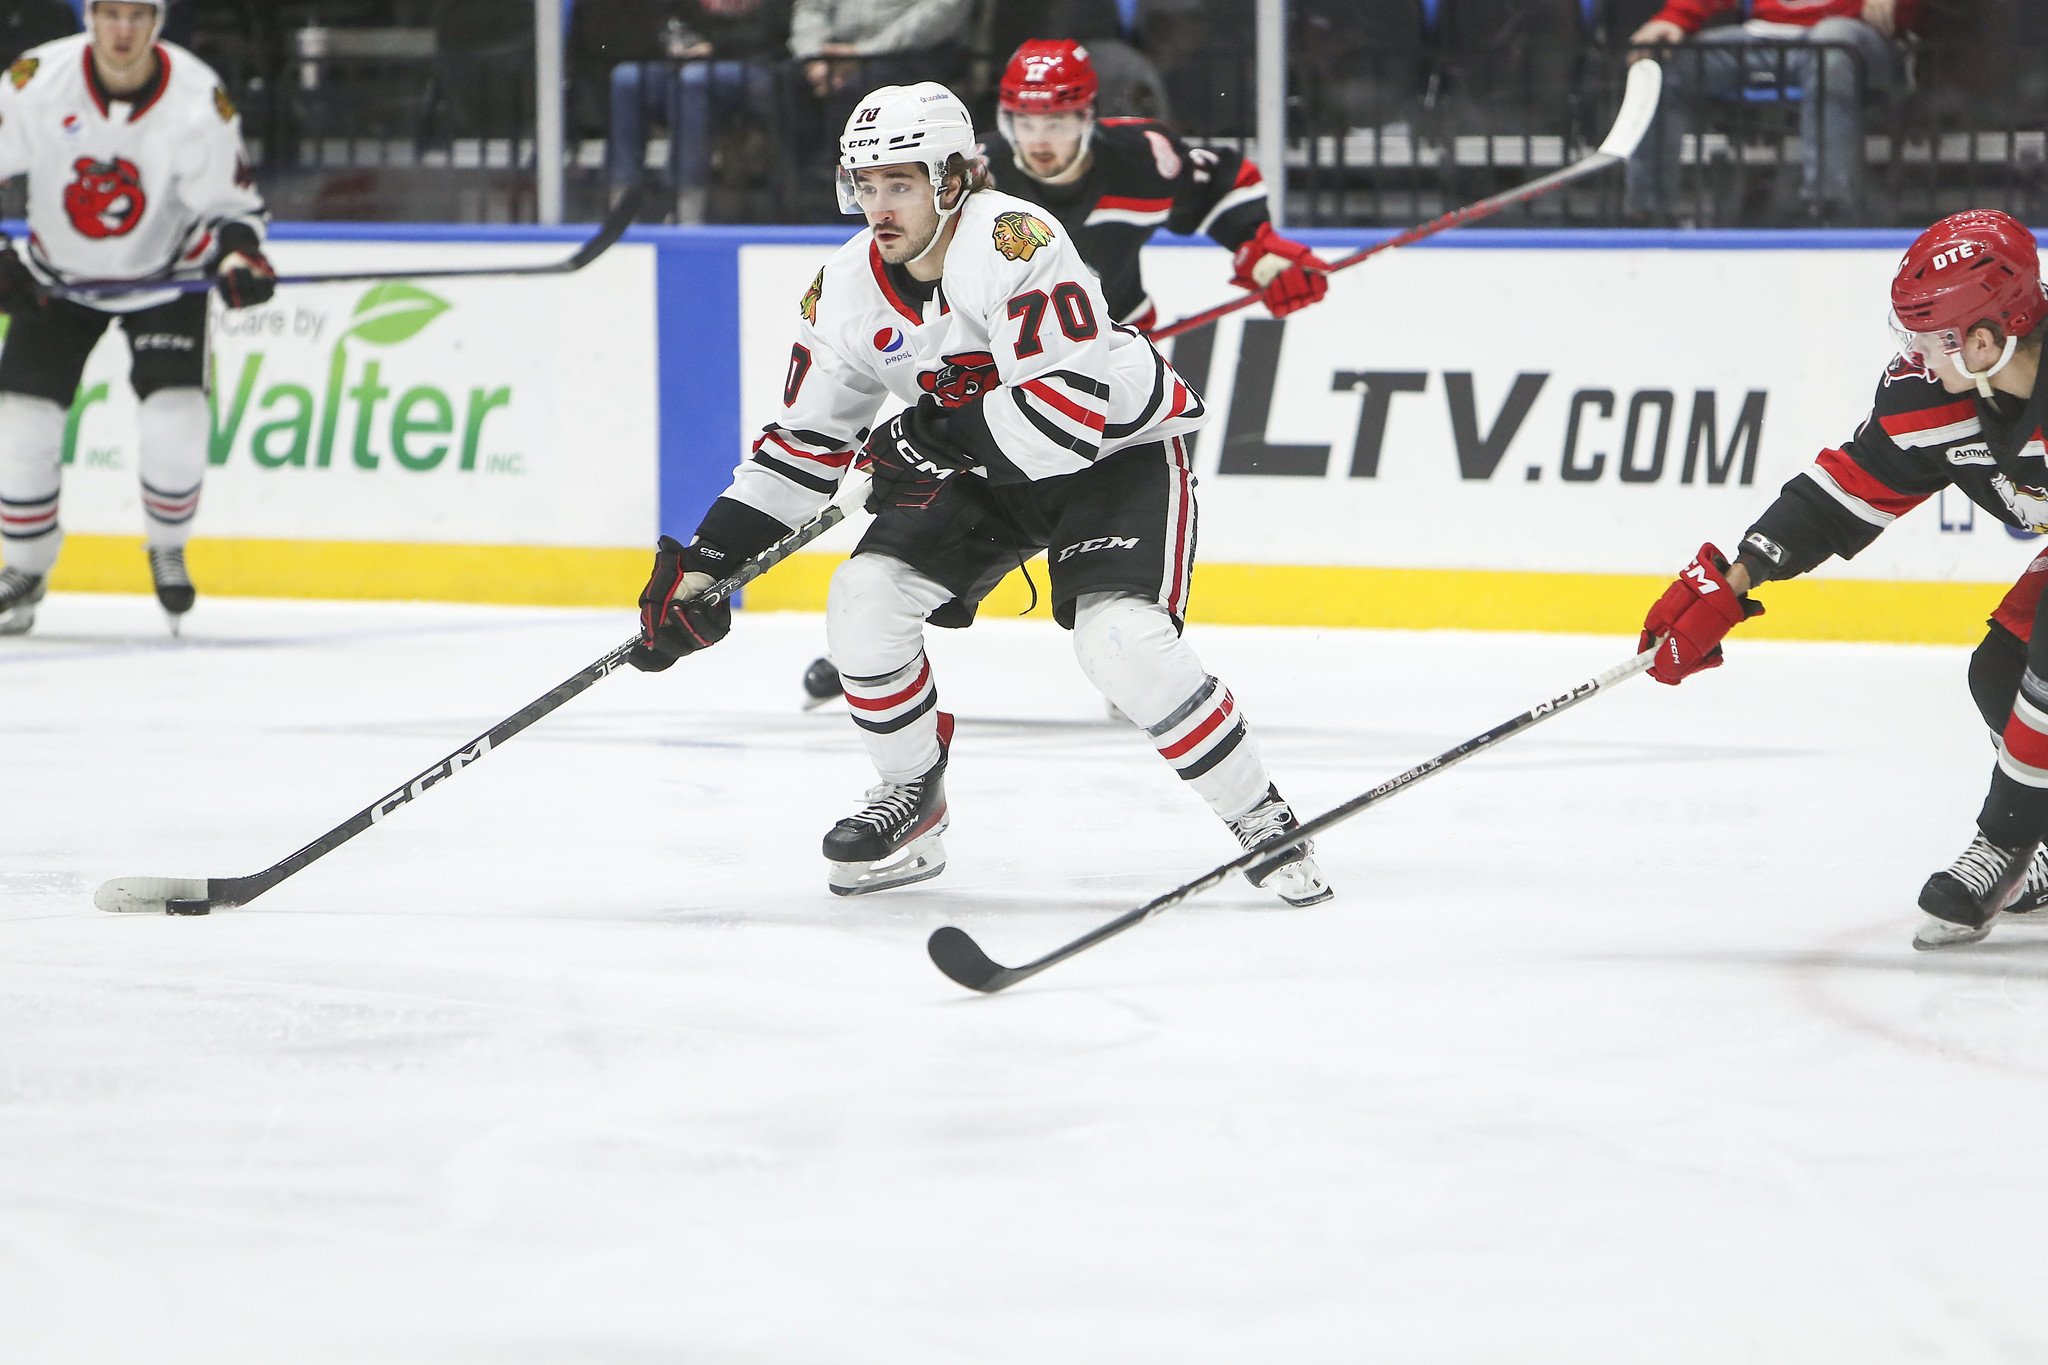 AHL hockey: What you need to know for Rockford IceHogs 2021-22 season